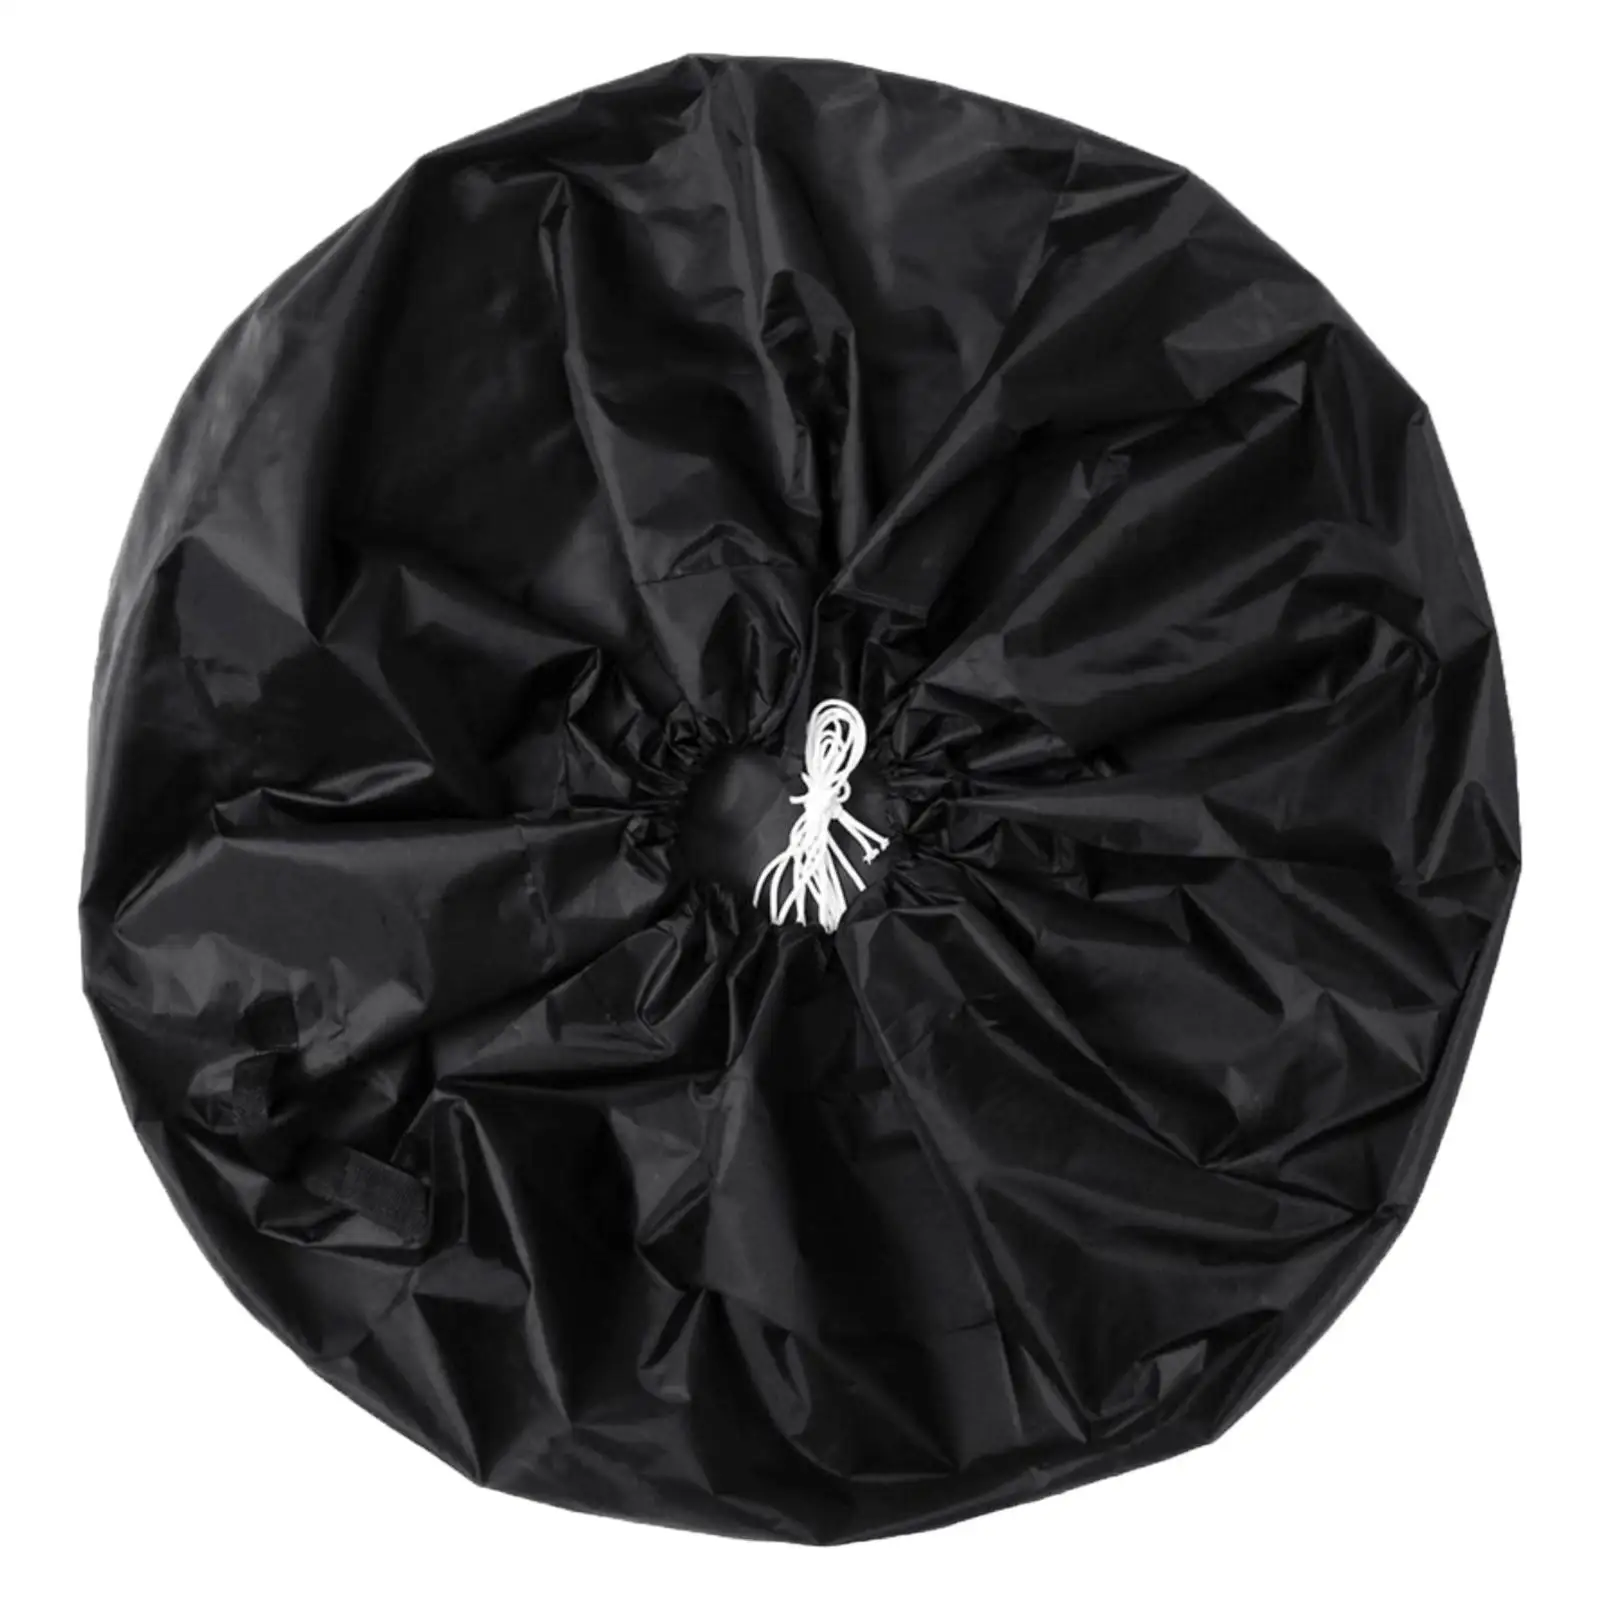 1 Package Tyre Cover Protective Camper Waterproof Fabric 210  Wheel  Fits for Any Wheel Size Dust-Proof  RV